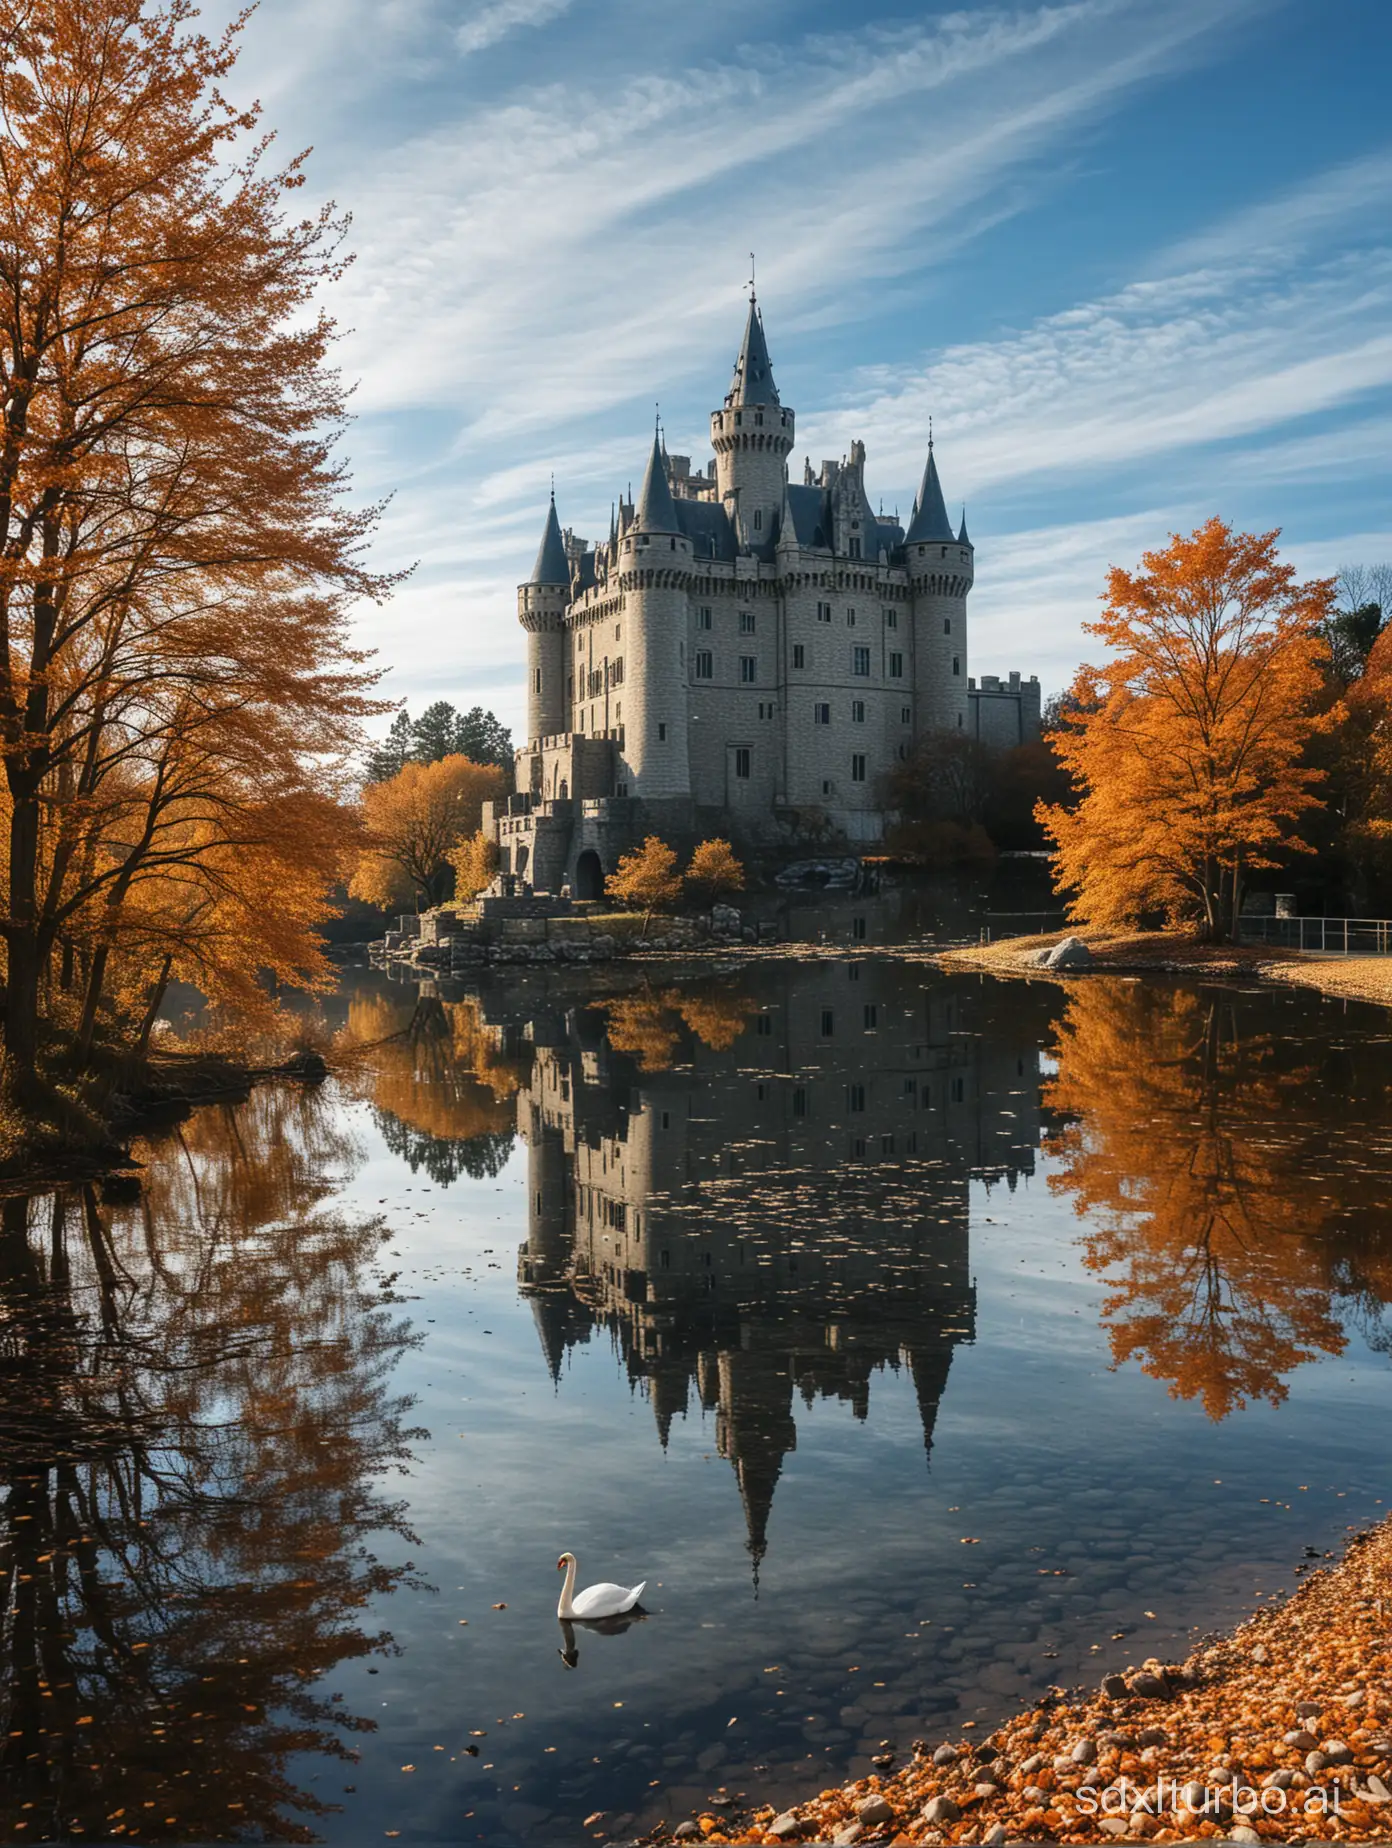 Majestic-New-Swan-Stone-Castle-in-Autumn-Under-a-Clear-Blue-Sky